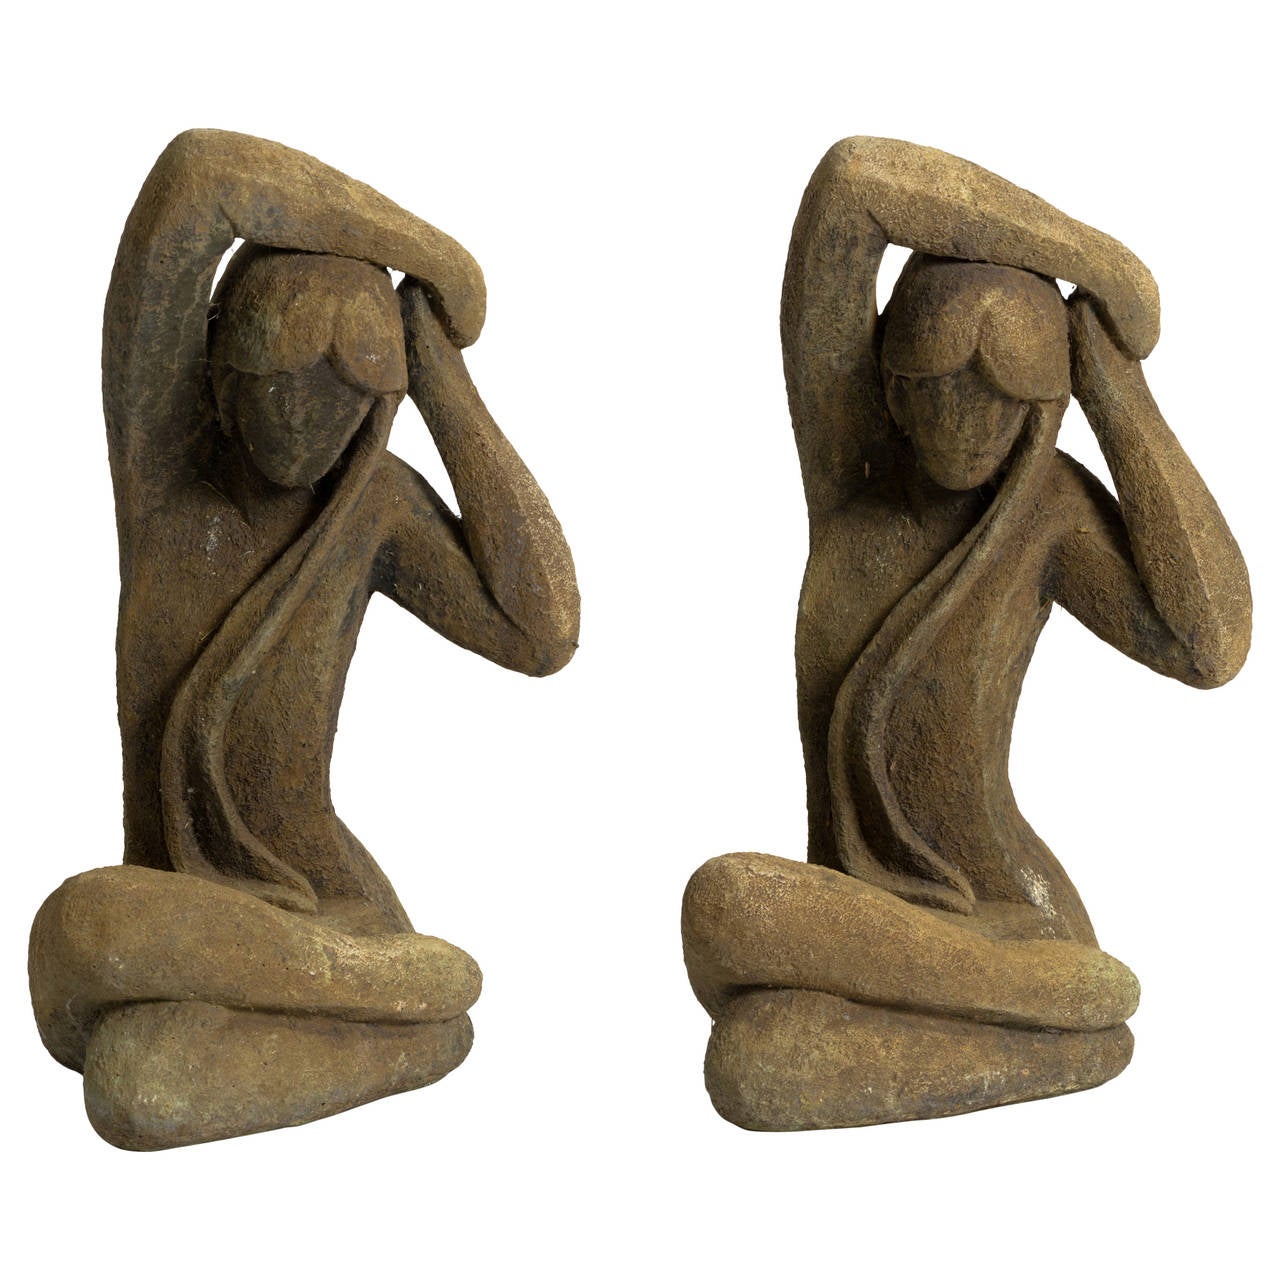 Pair of Vintage Cement Garden Statues of Ladies For Sale at 1stdibs